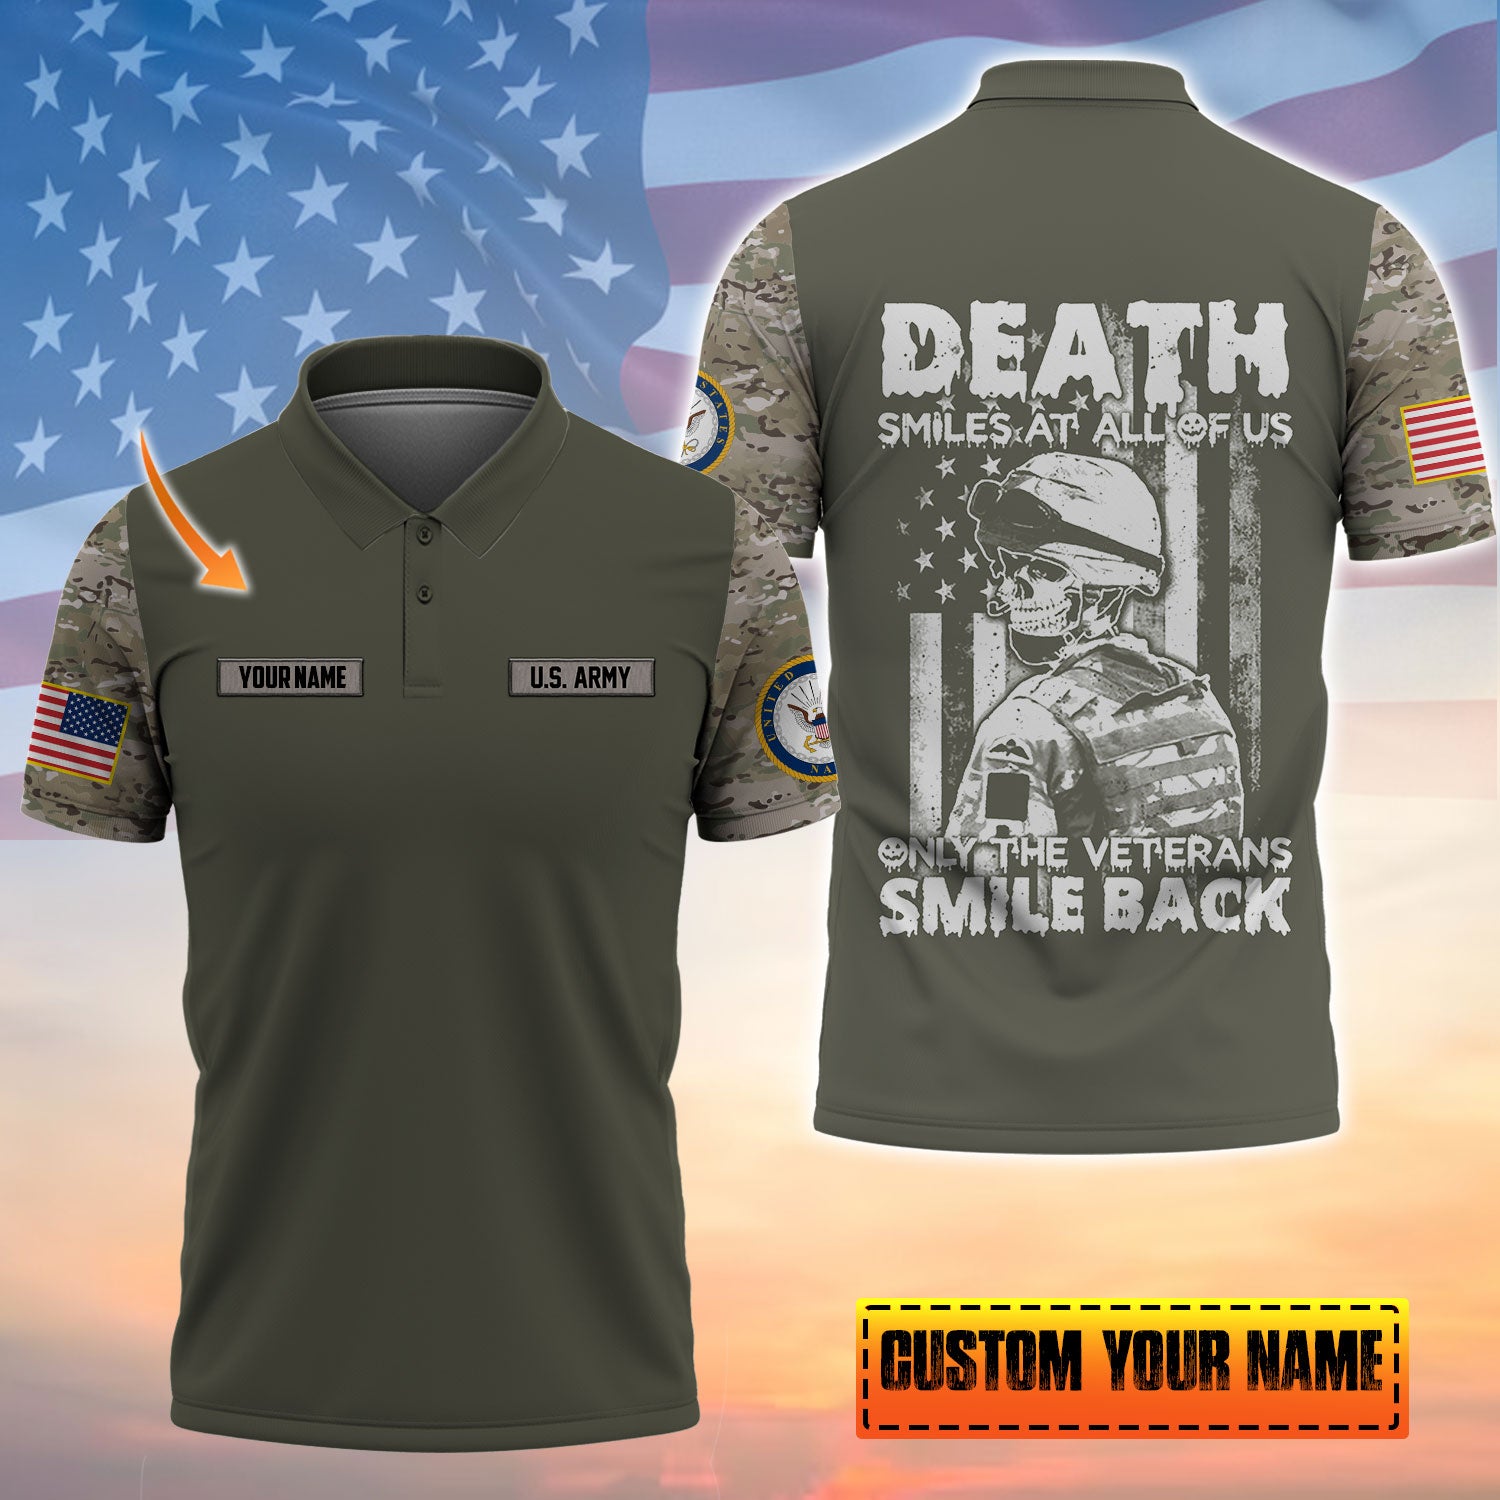 Death Smiles At All Of Us - Only The Veterans Smile Back - Customized U.S. Veteran Polo Shirt, Gift For Veterans